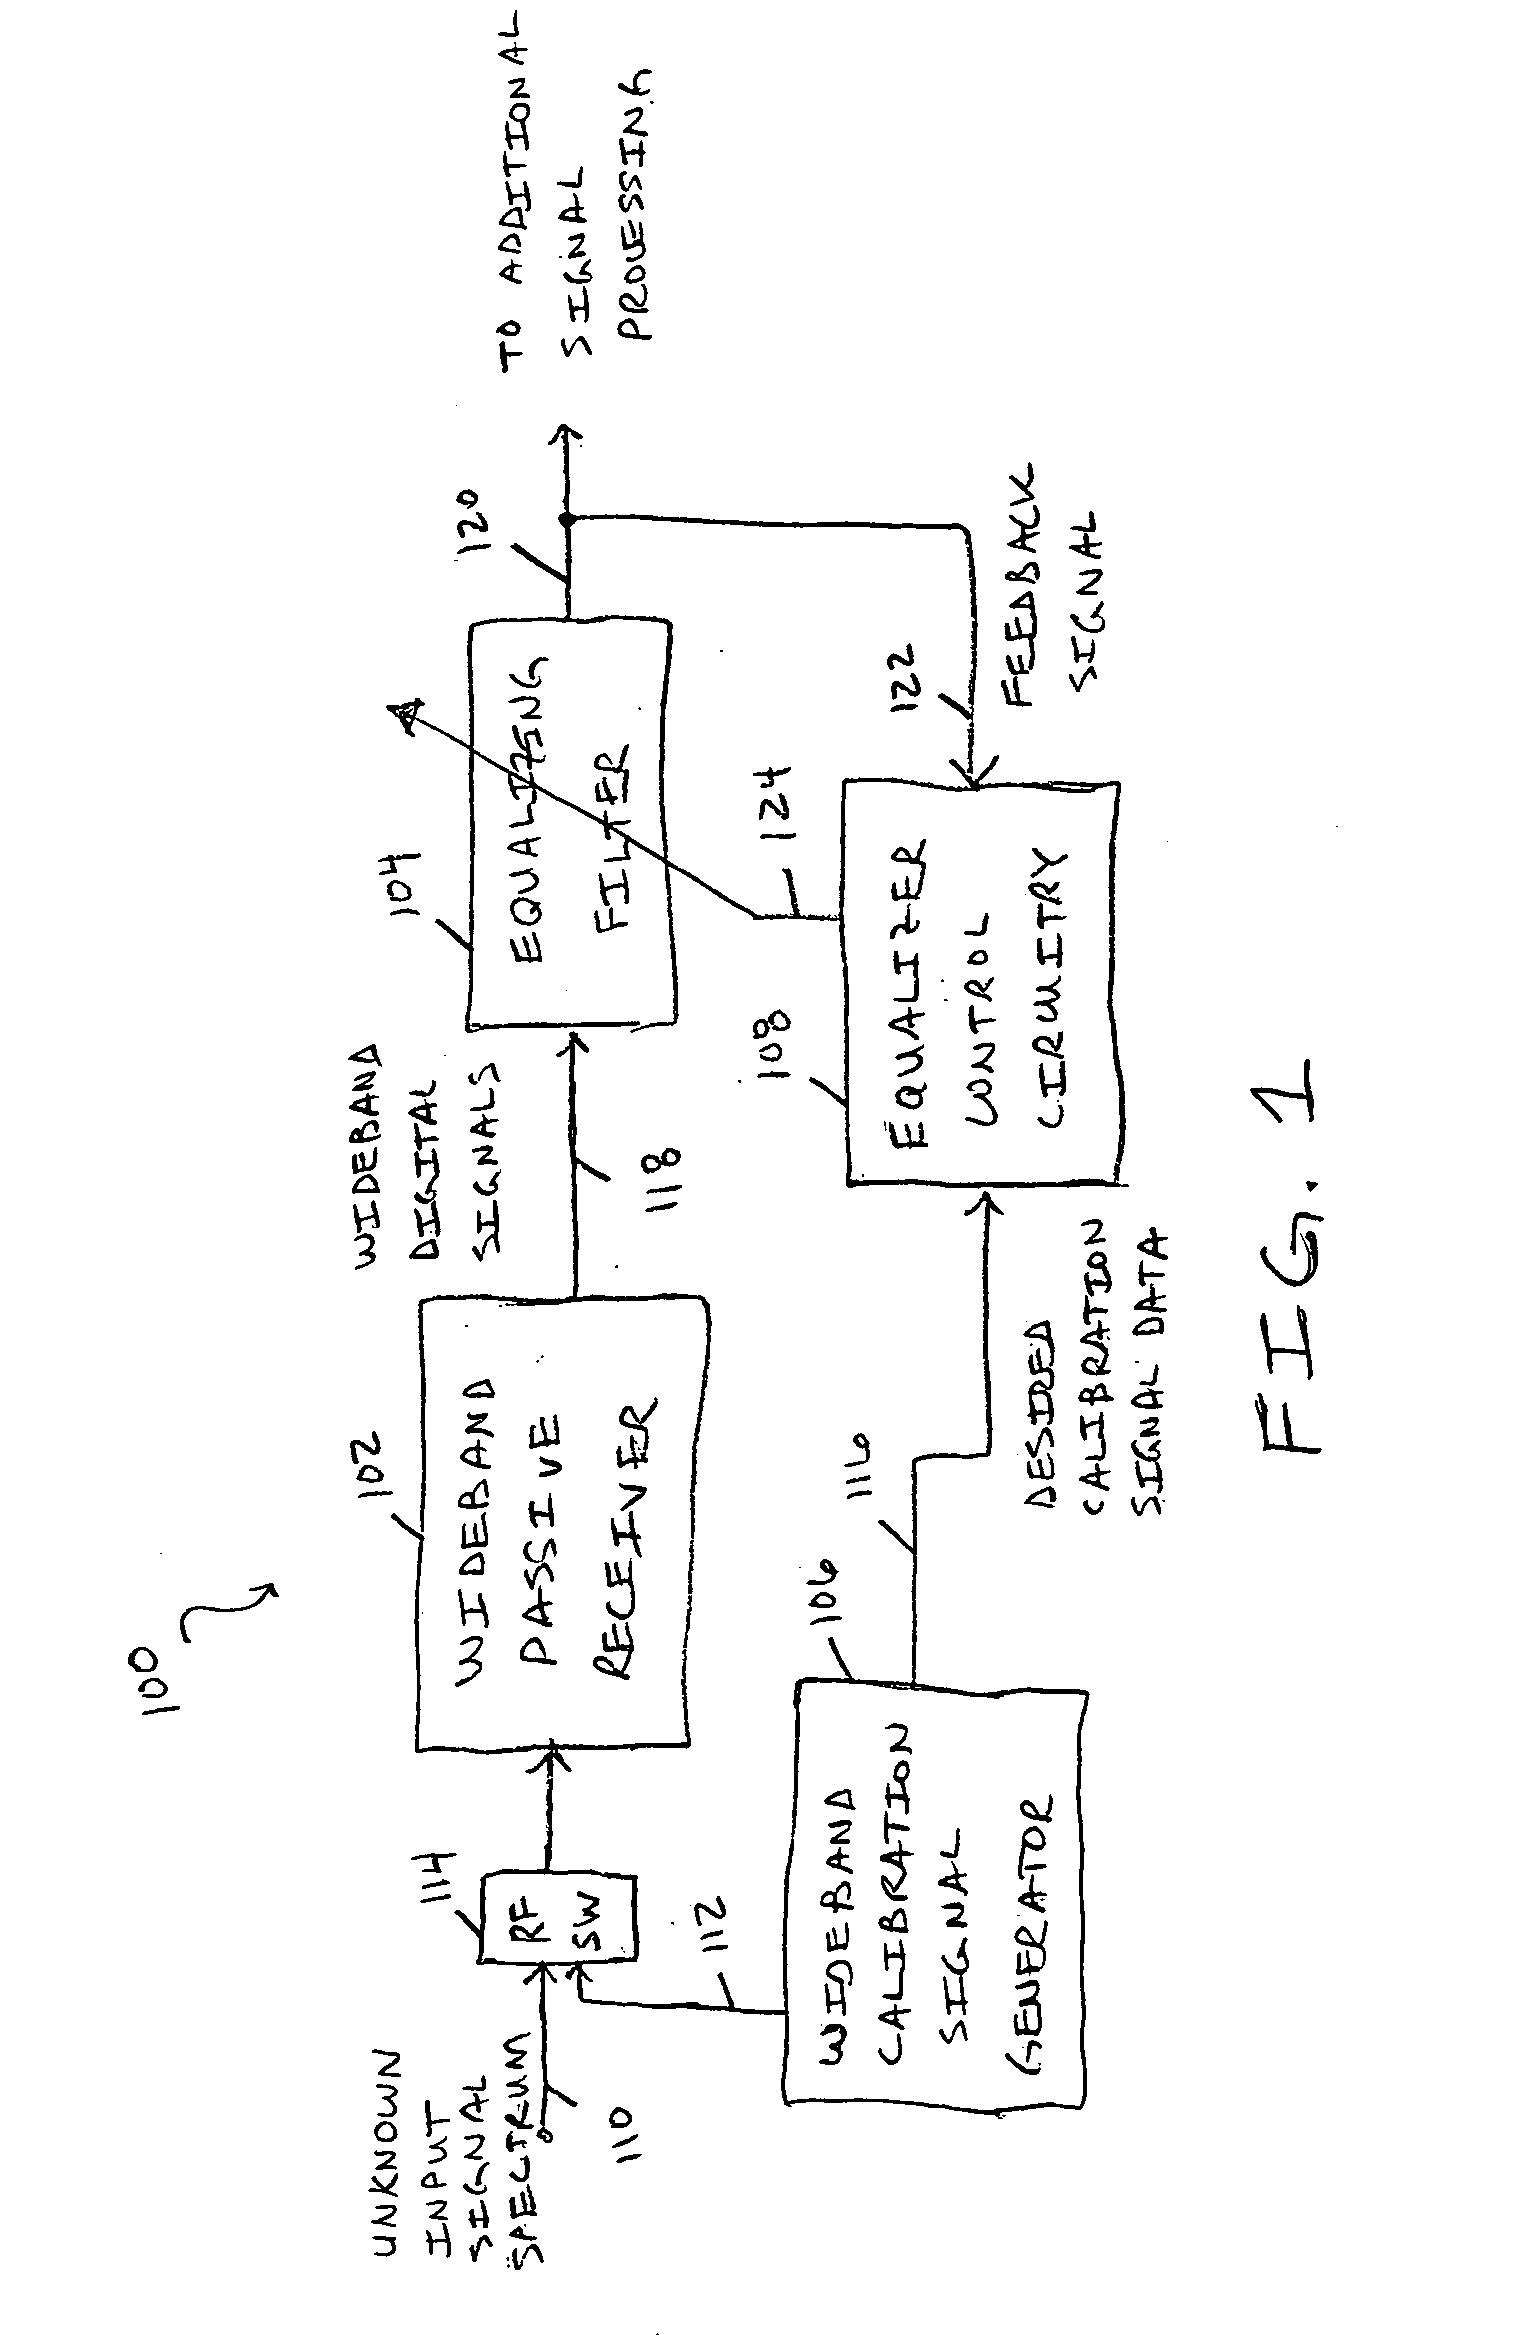 Adaptive channel equalization technique and method for wideband passive digital receivers